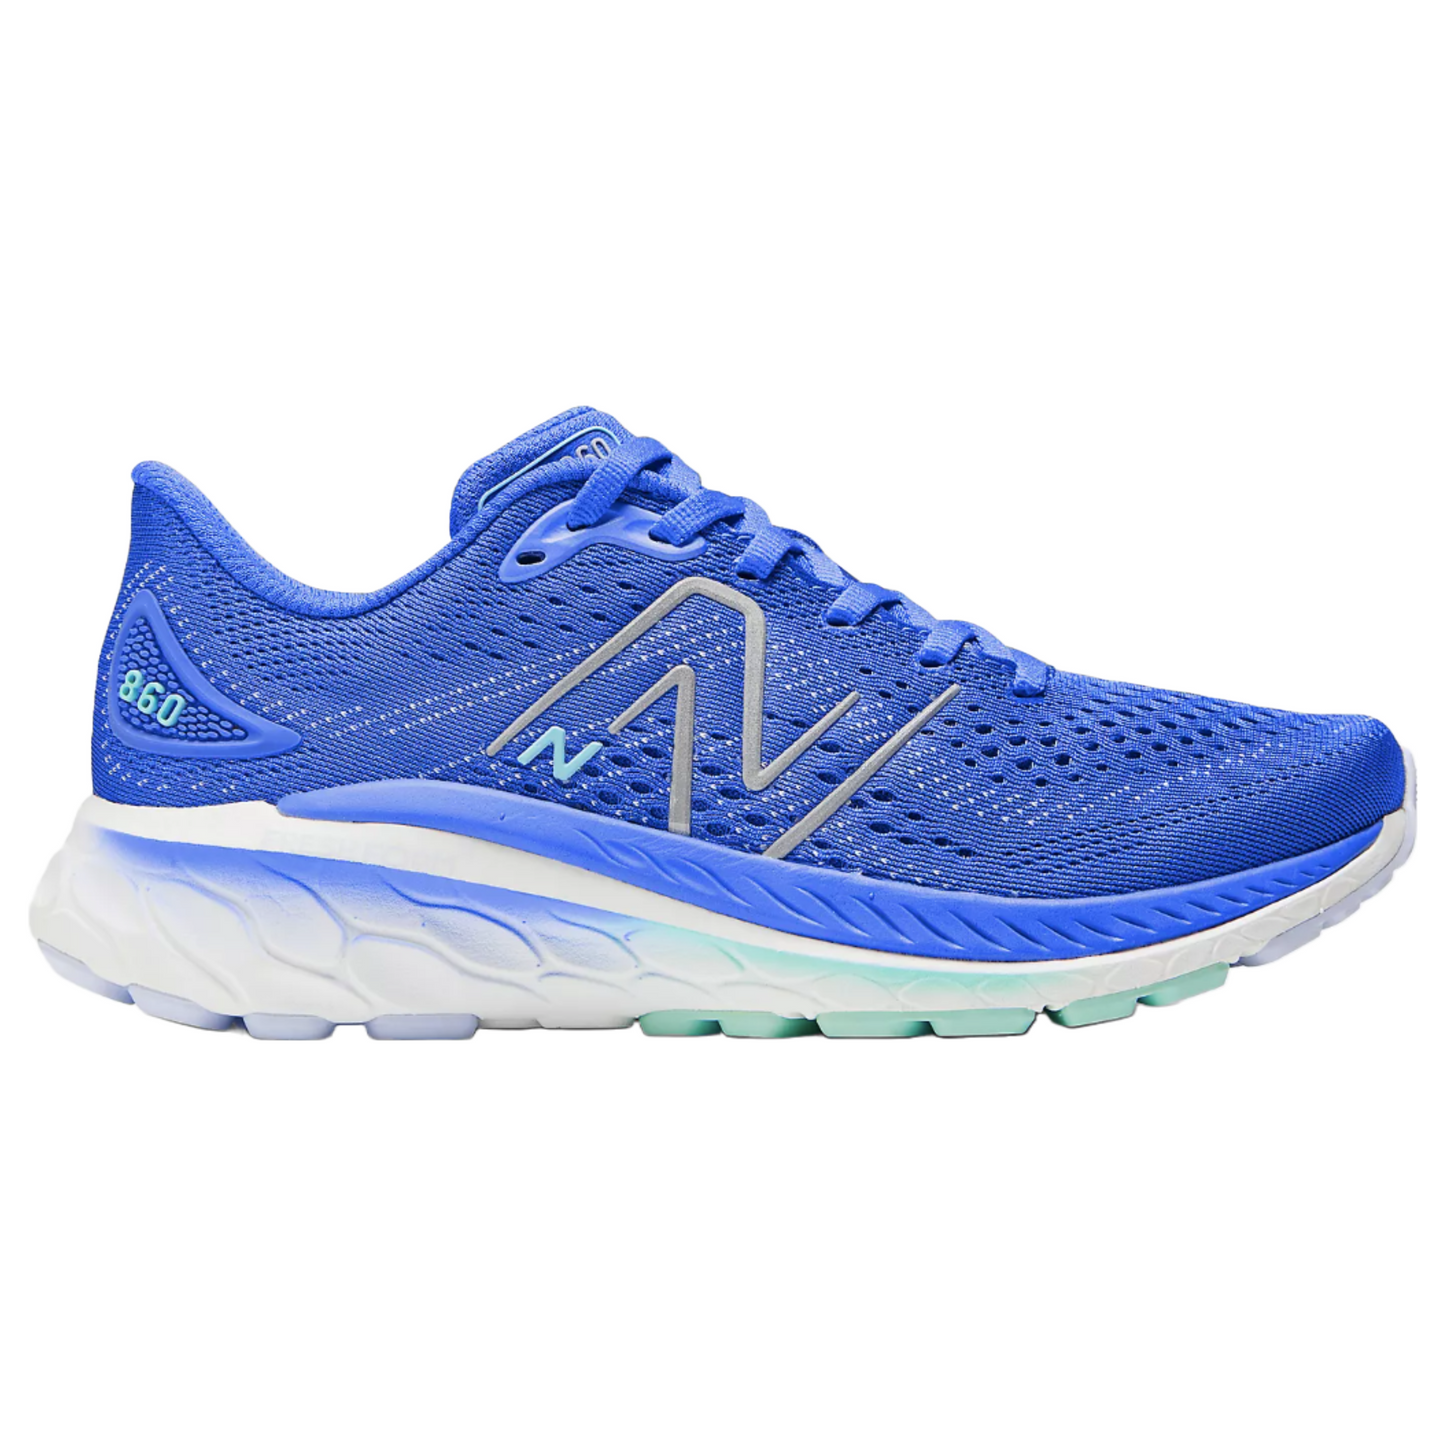 New Balance Women's 860 stability running shoes in blue